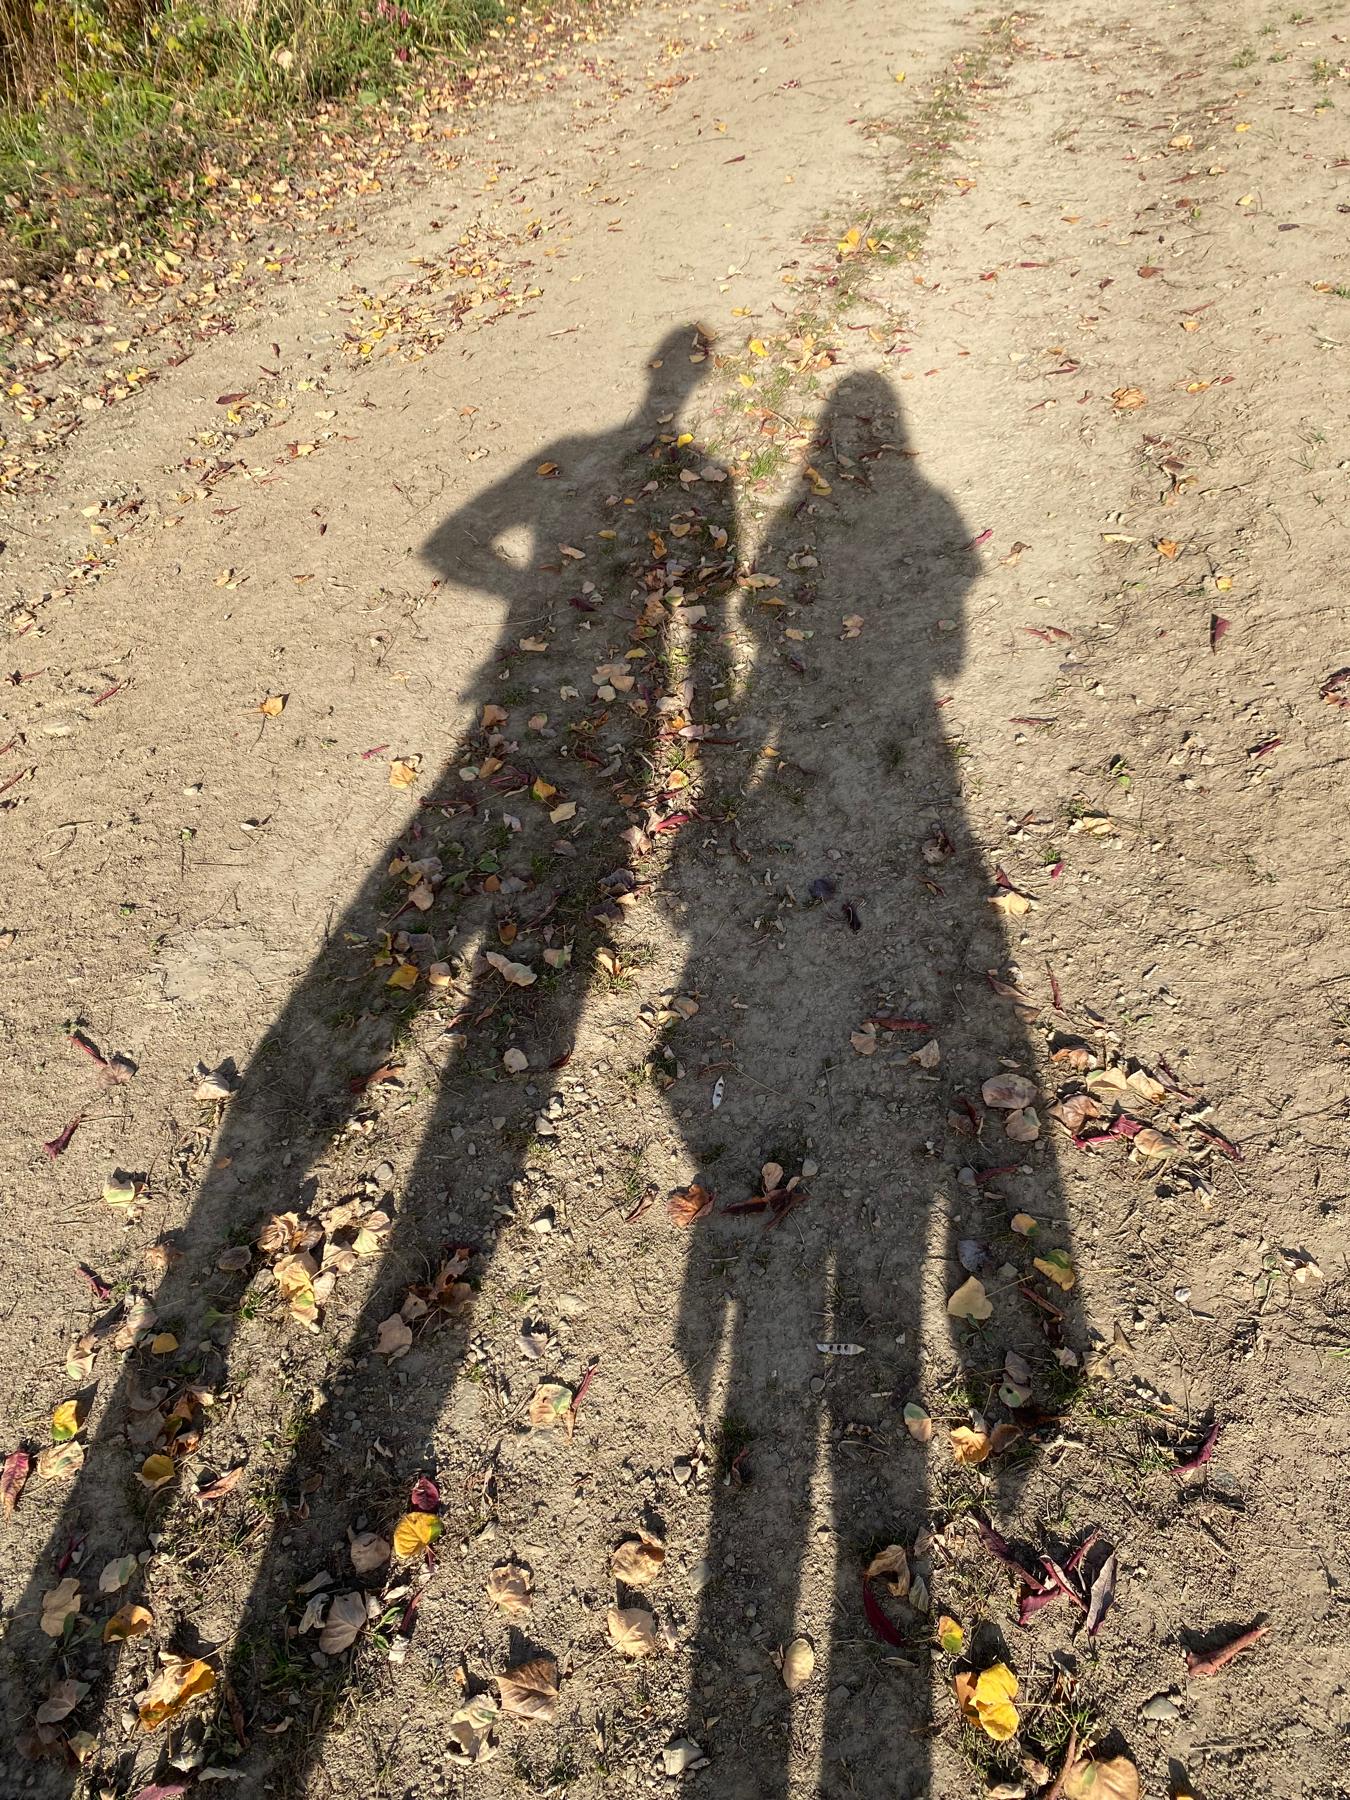 10/30 - Our shadow pictures continue!